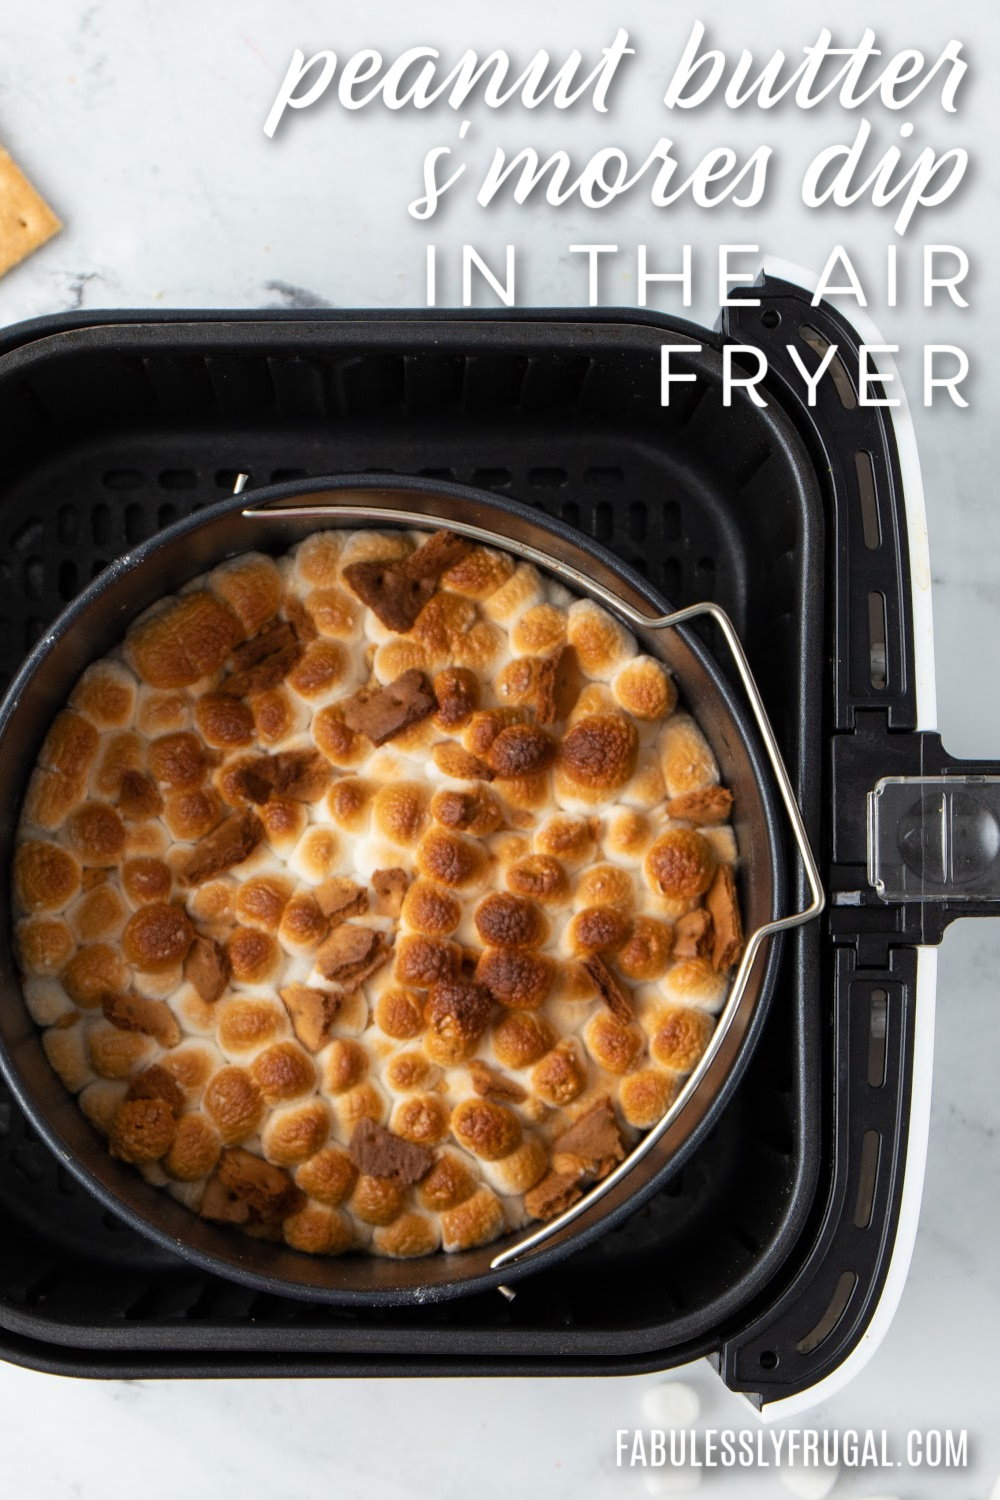 peanut butter smores dip in the air fryer